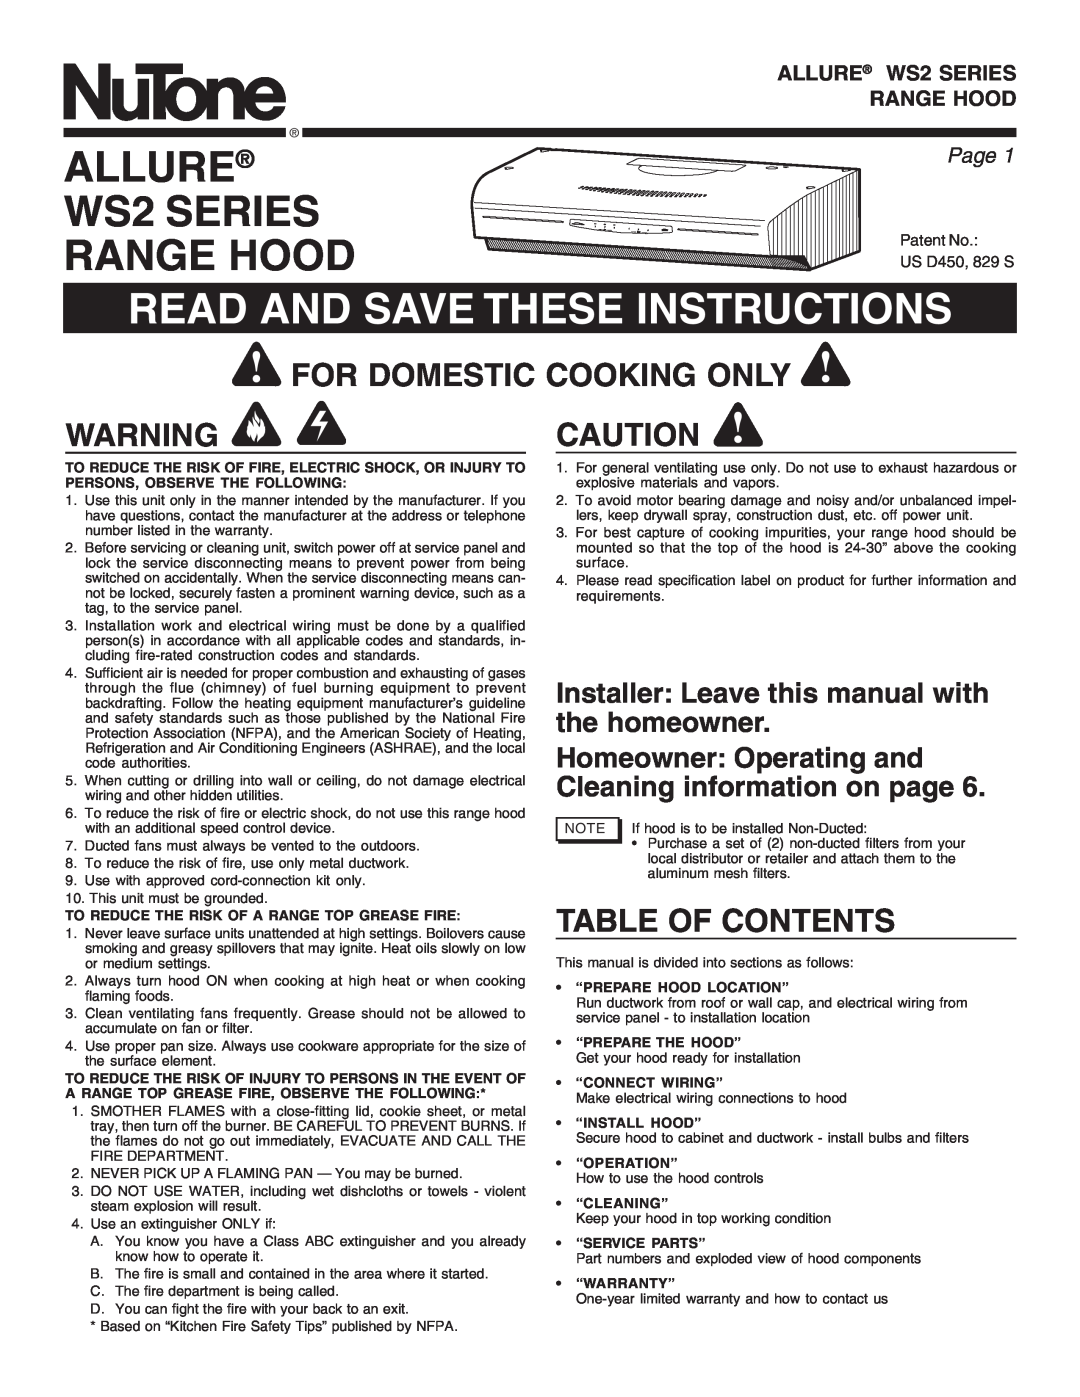 NuTone manual ALLURE WS2 SERIES RANGE HOOD, Read And Save These Instructions, For Domestic Cooking Only, Page 